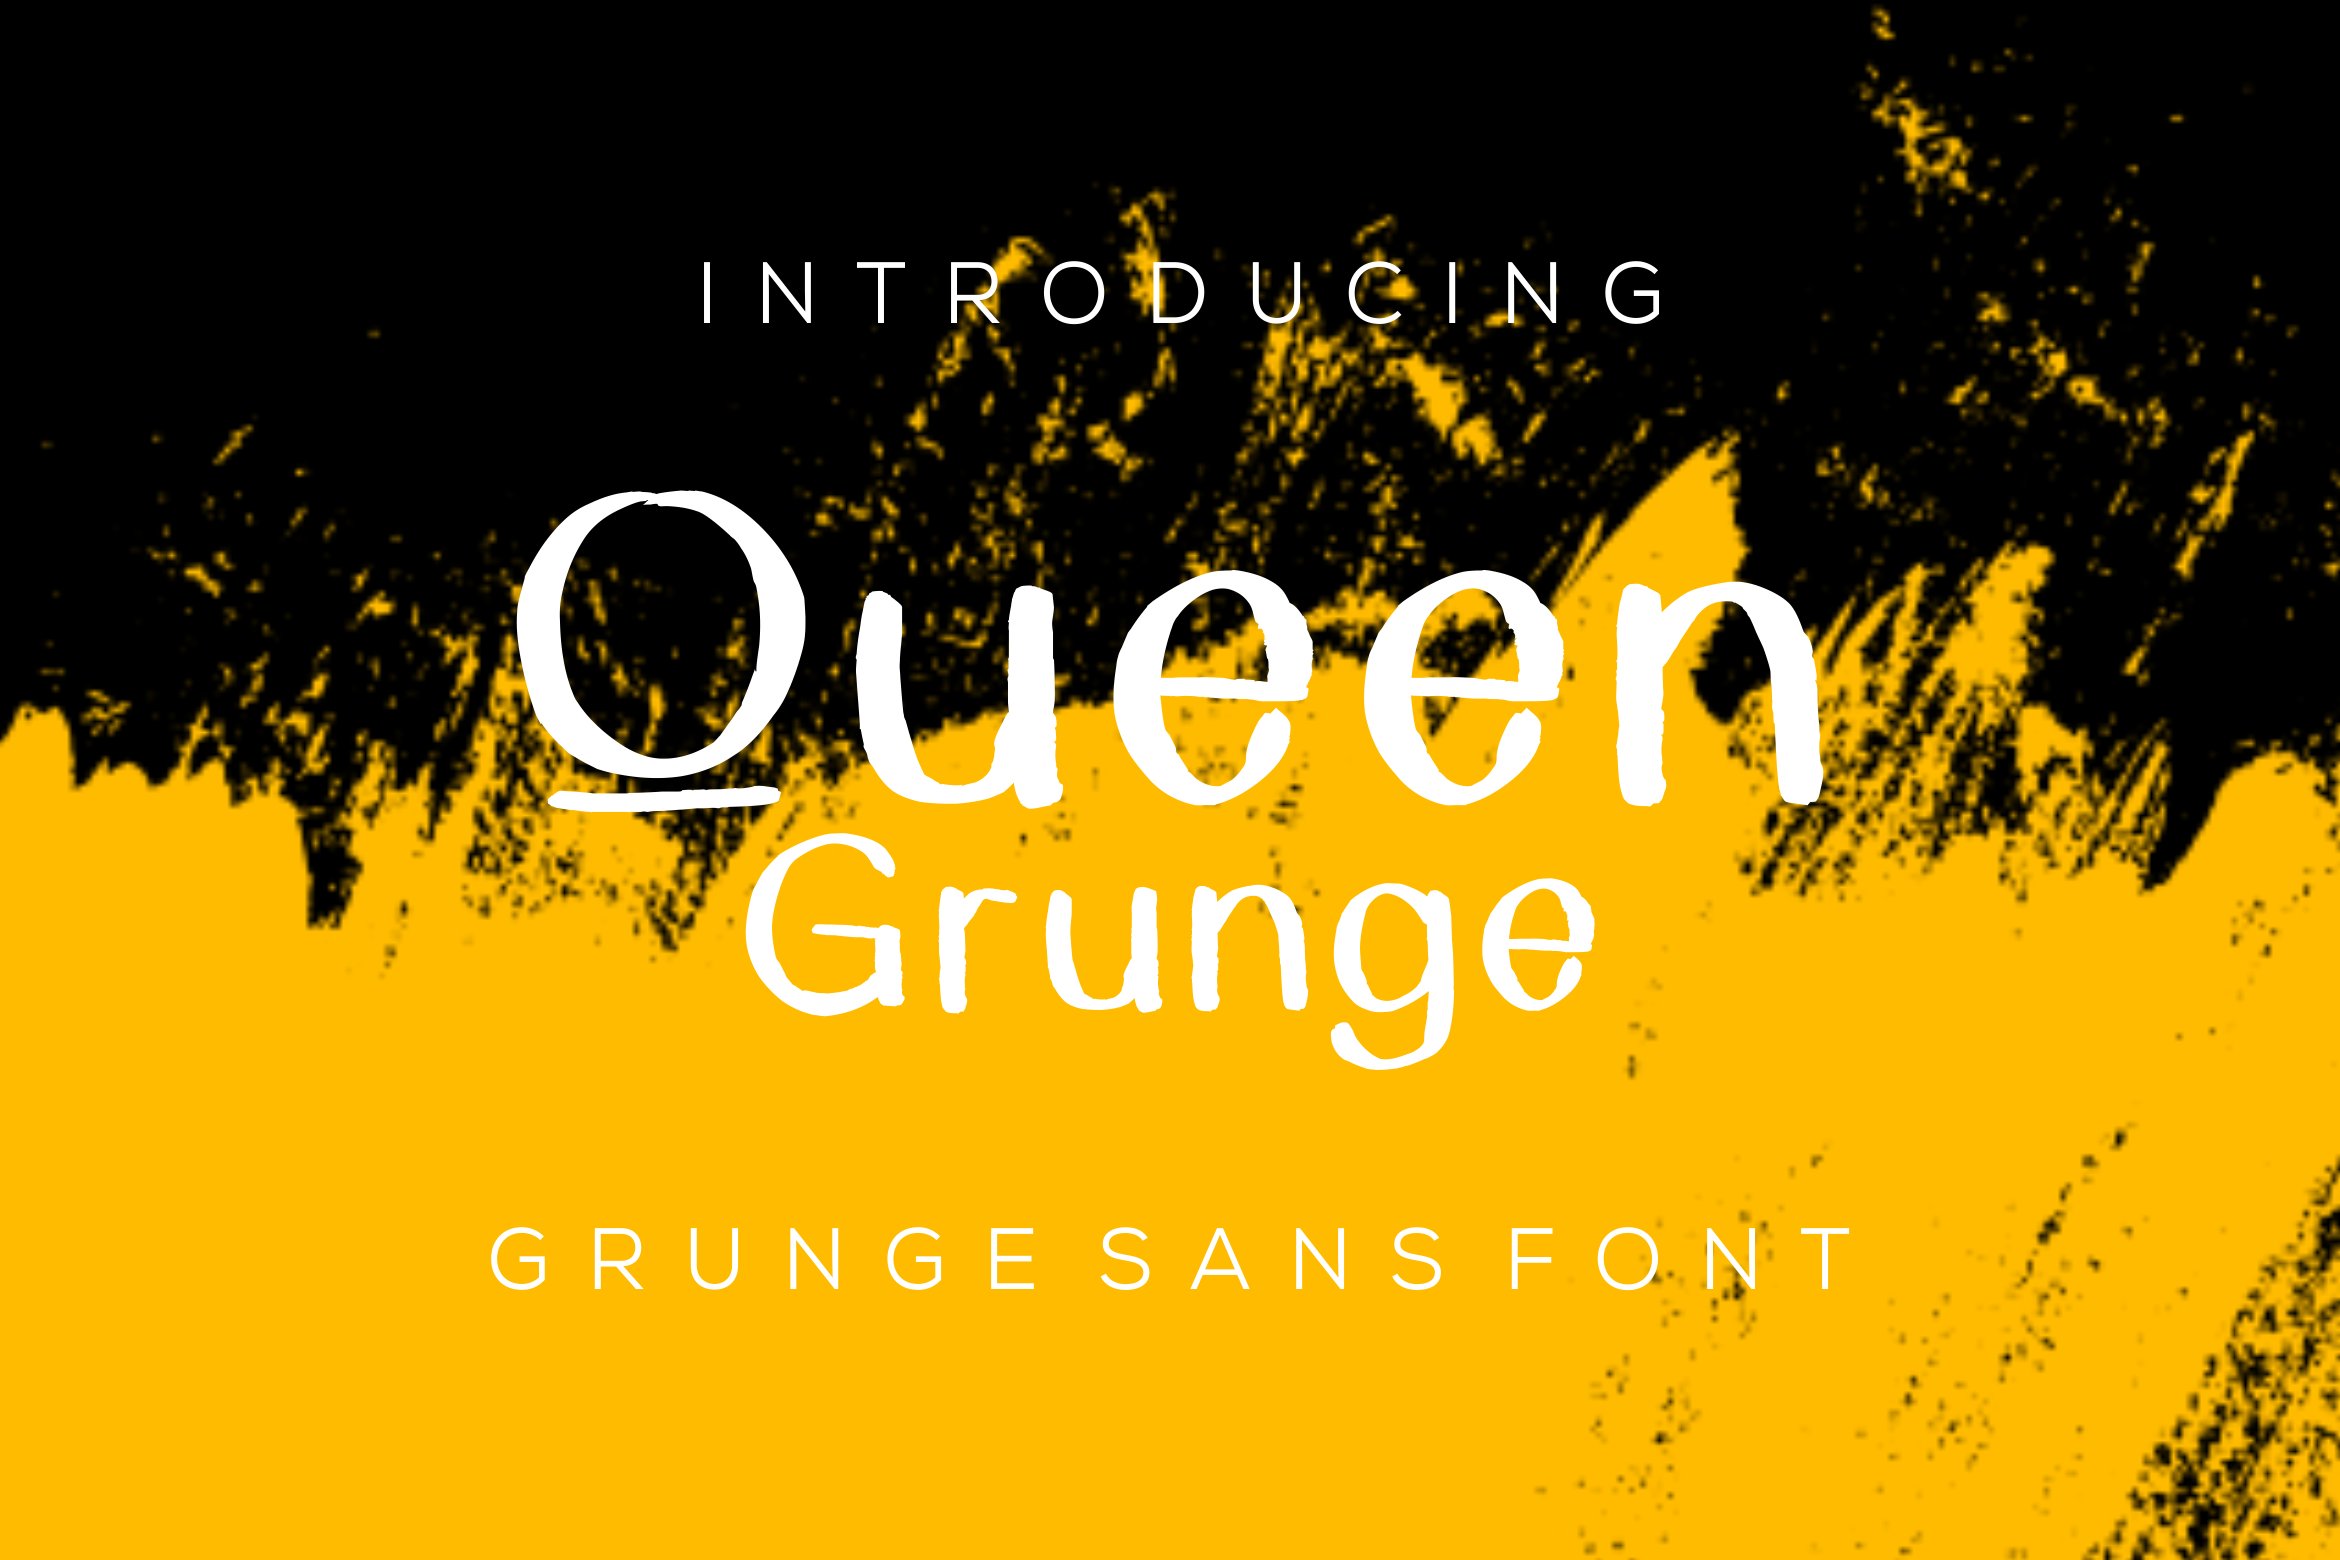 QueenGrunge Sans cover image.